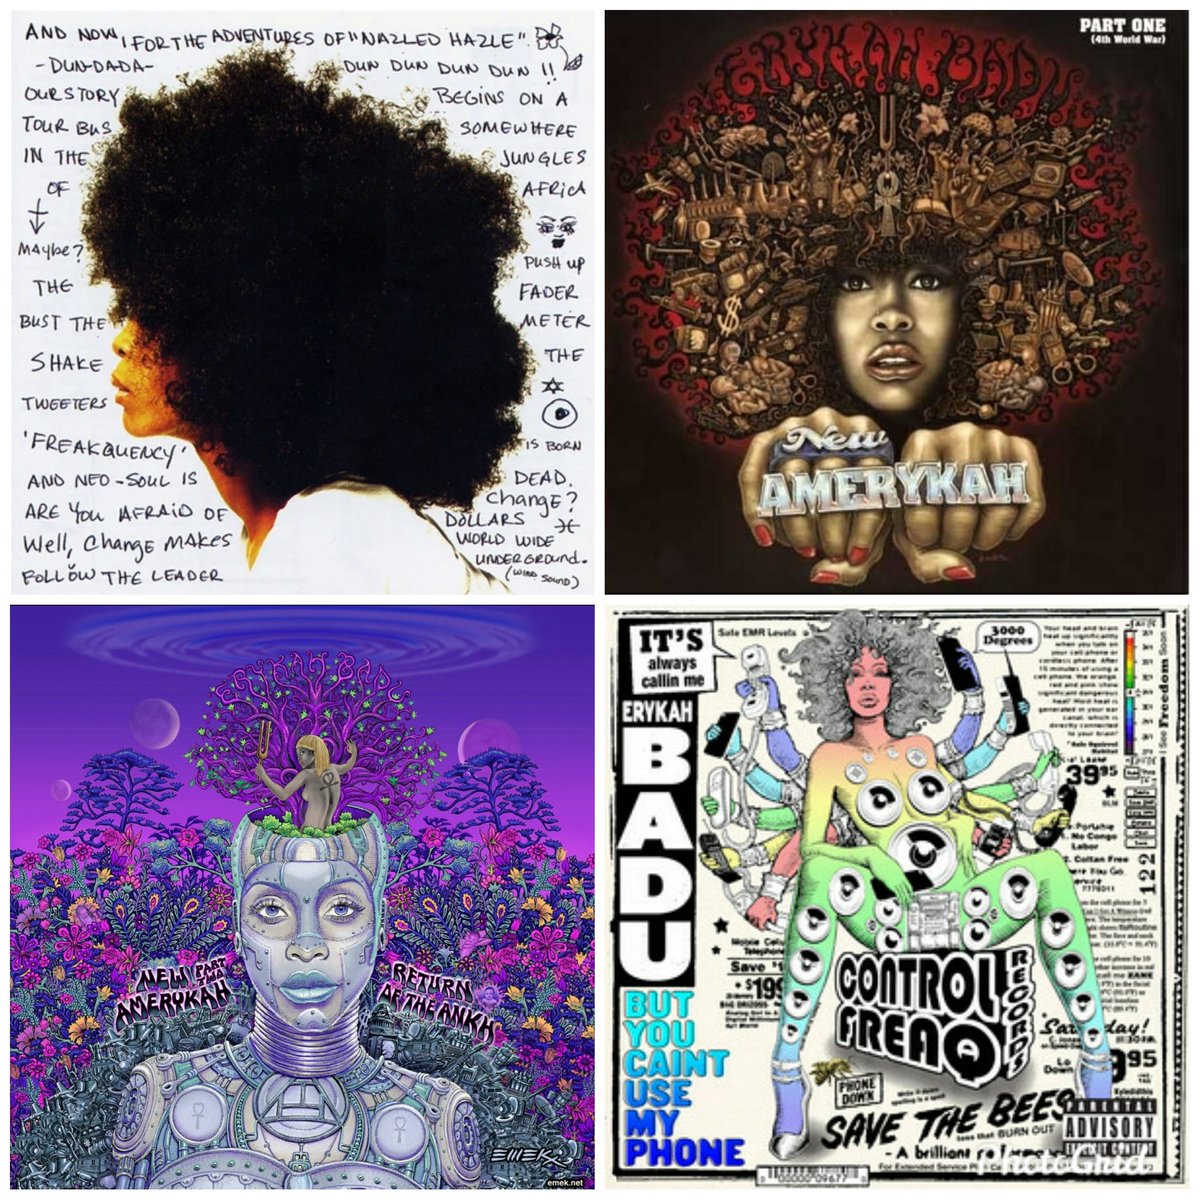 Bottom line: Three more albums, countless collabs and mixtapes later, she a whole legend, best known for being consistently dope over the course of her 20+ year career  #JillScottVsErykahBadu  #ErykahBaduvsJillScott  #verzuz